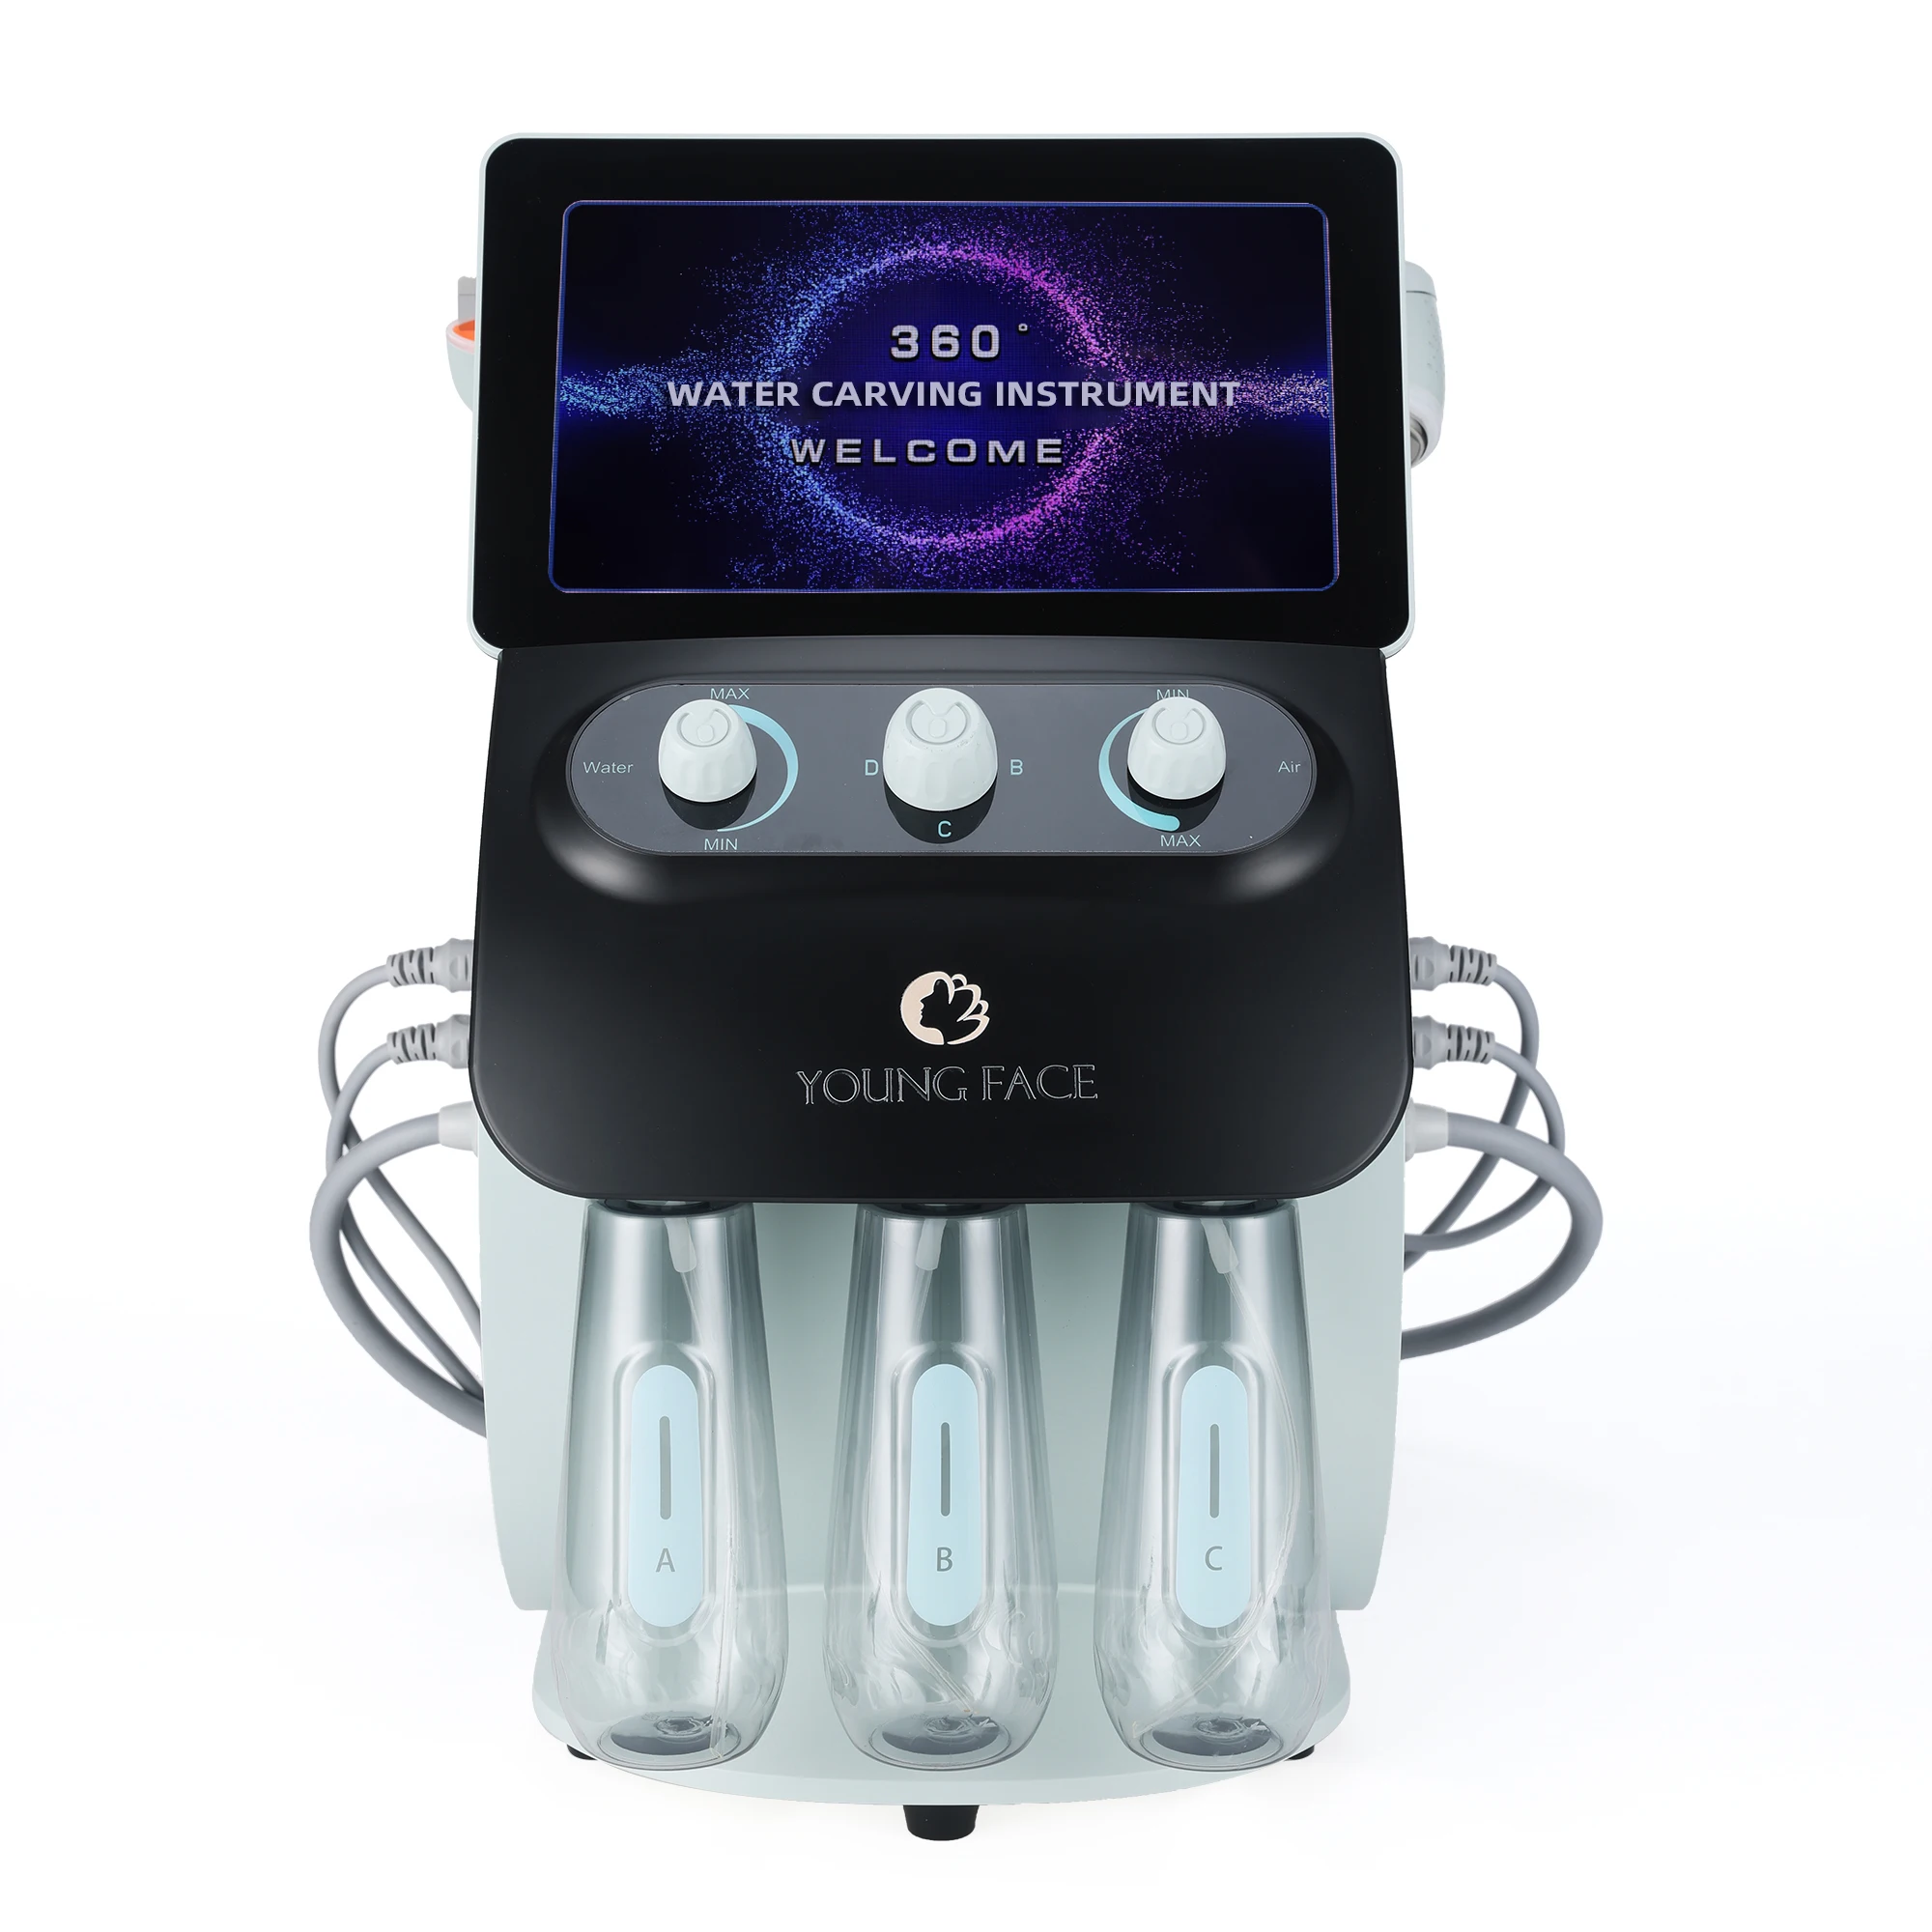 

New H2O2 Small Bubble Hydro Dermabrasion Facial Machine 6 In 1 Visible Aqua Peeling Oxygen Facial Skin Cleaning Spa Device